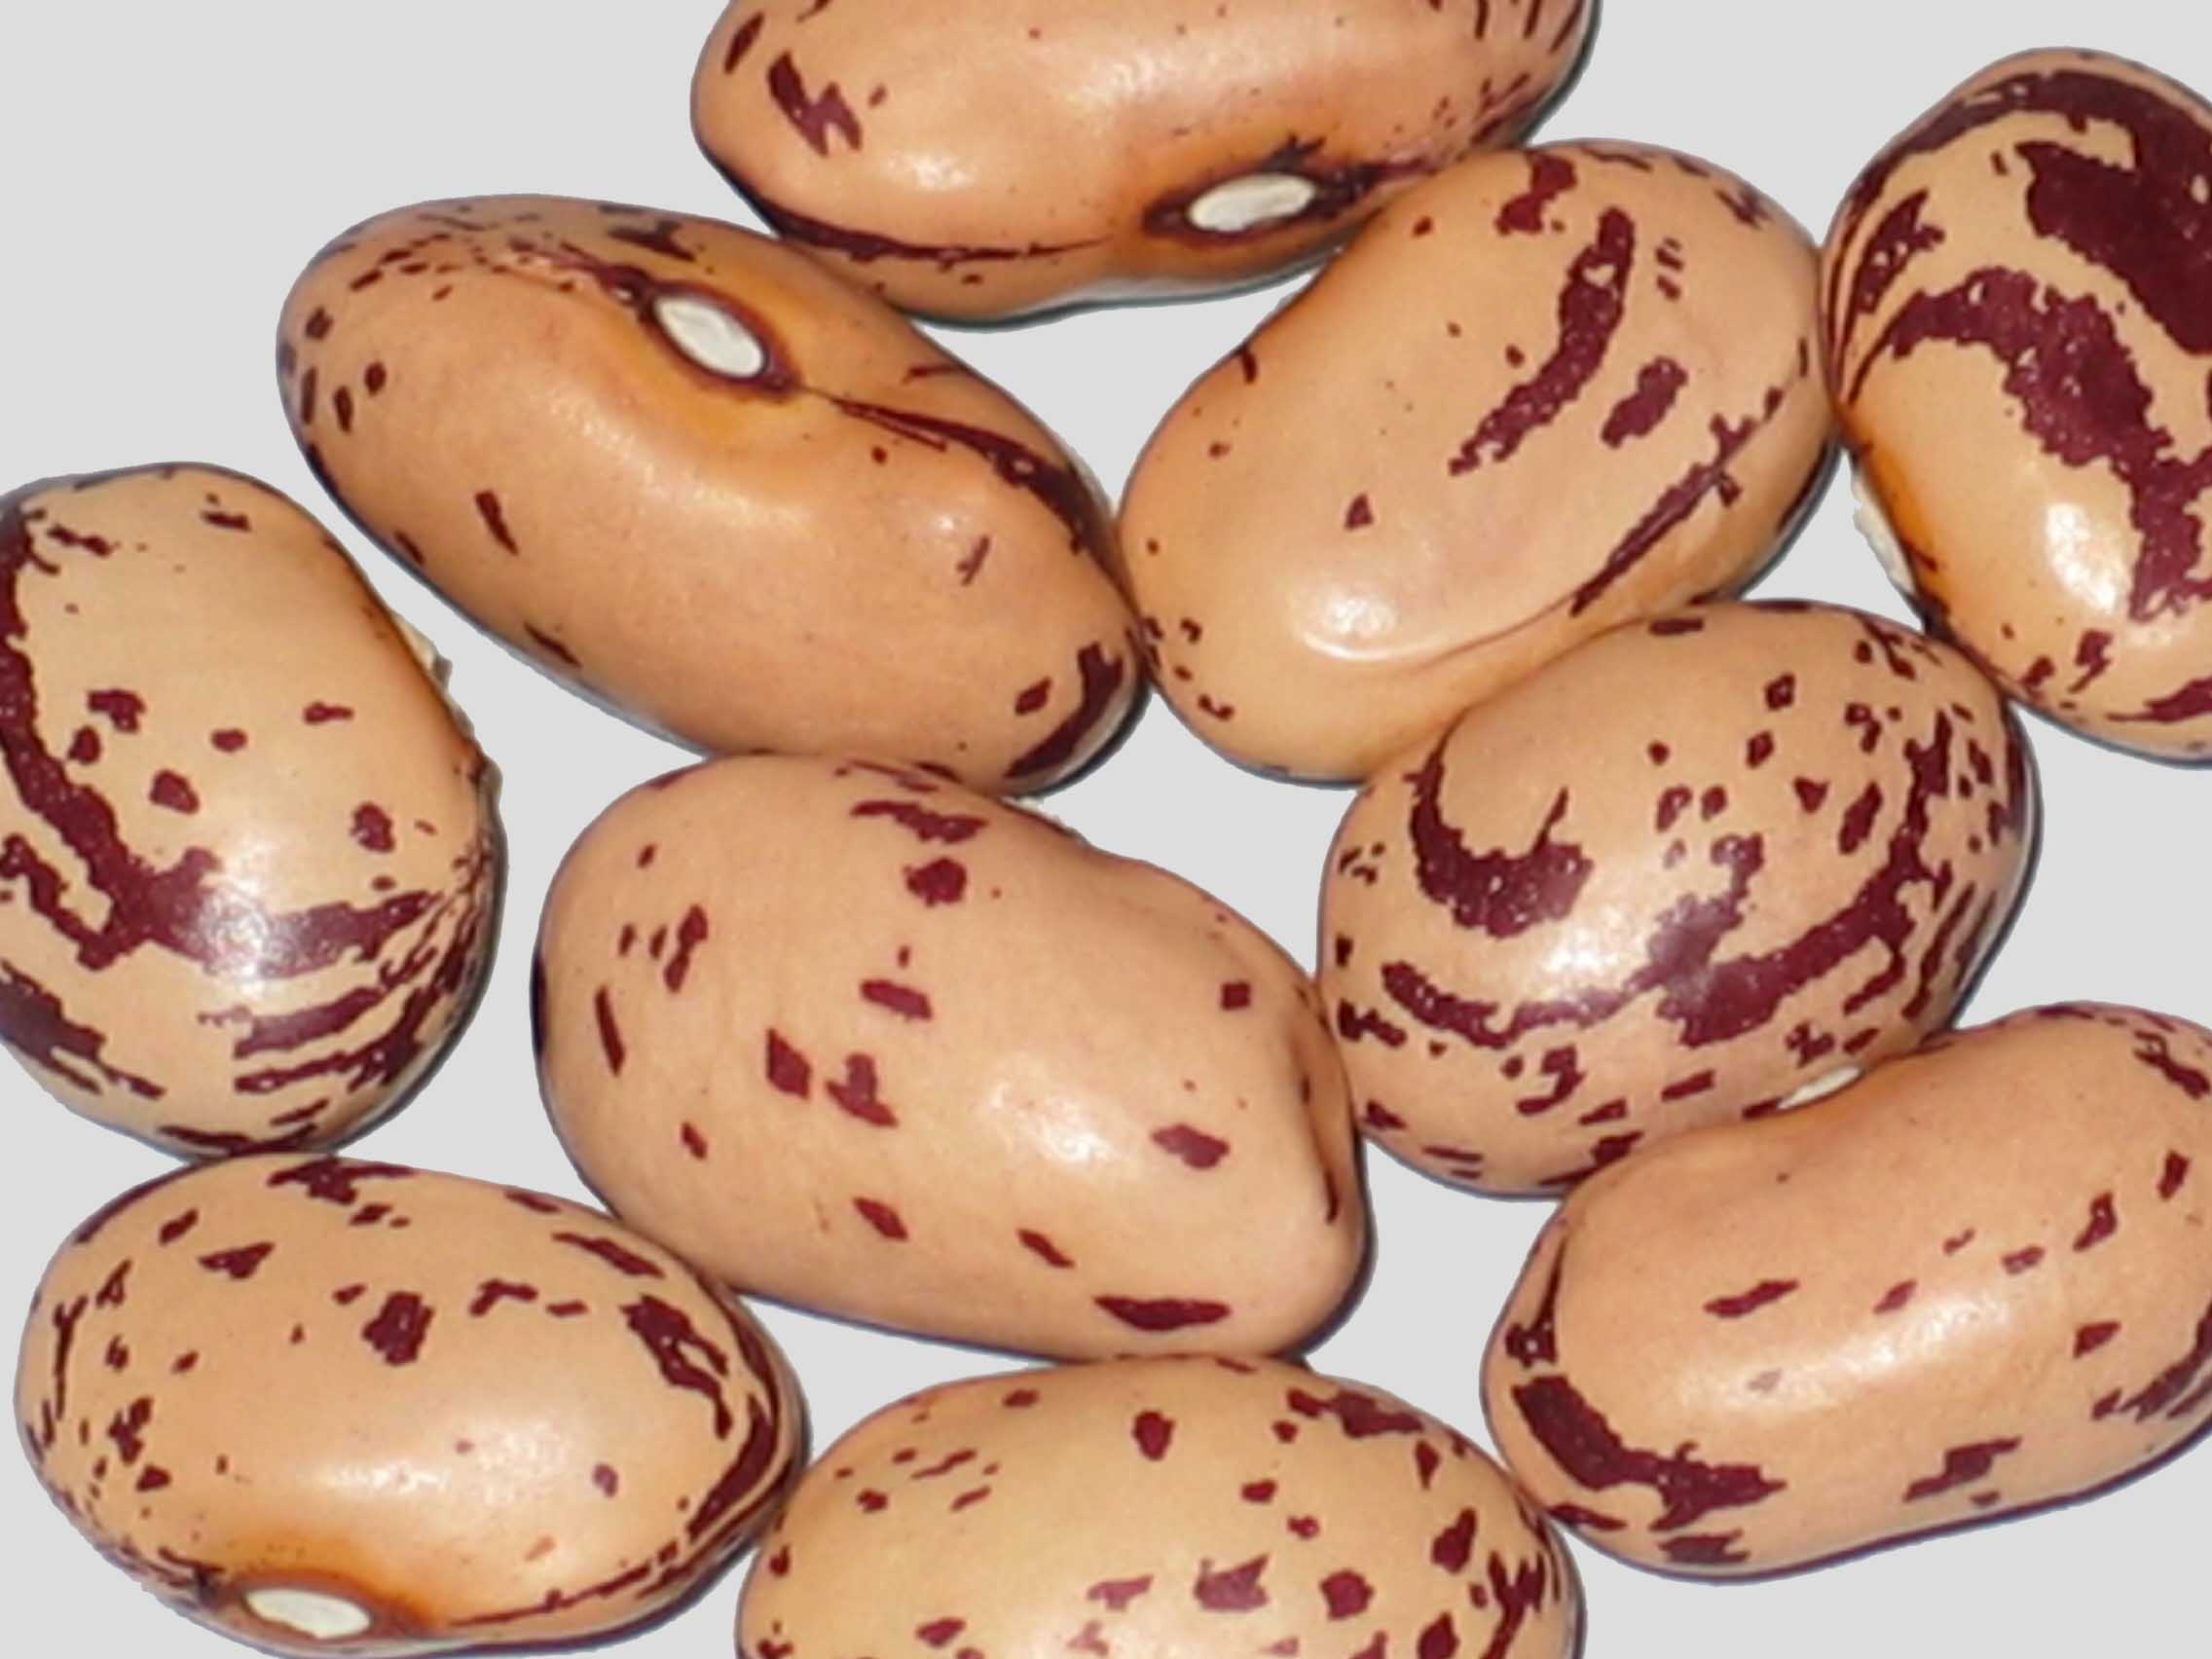 image of Sarconi 1 beans